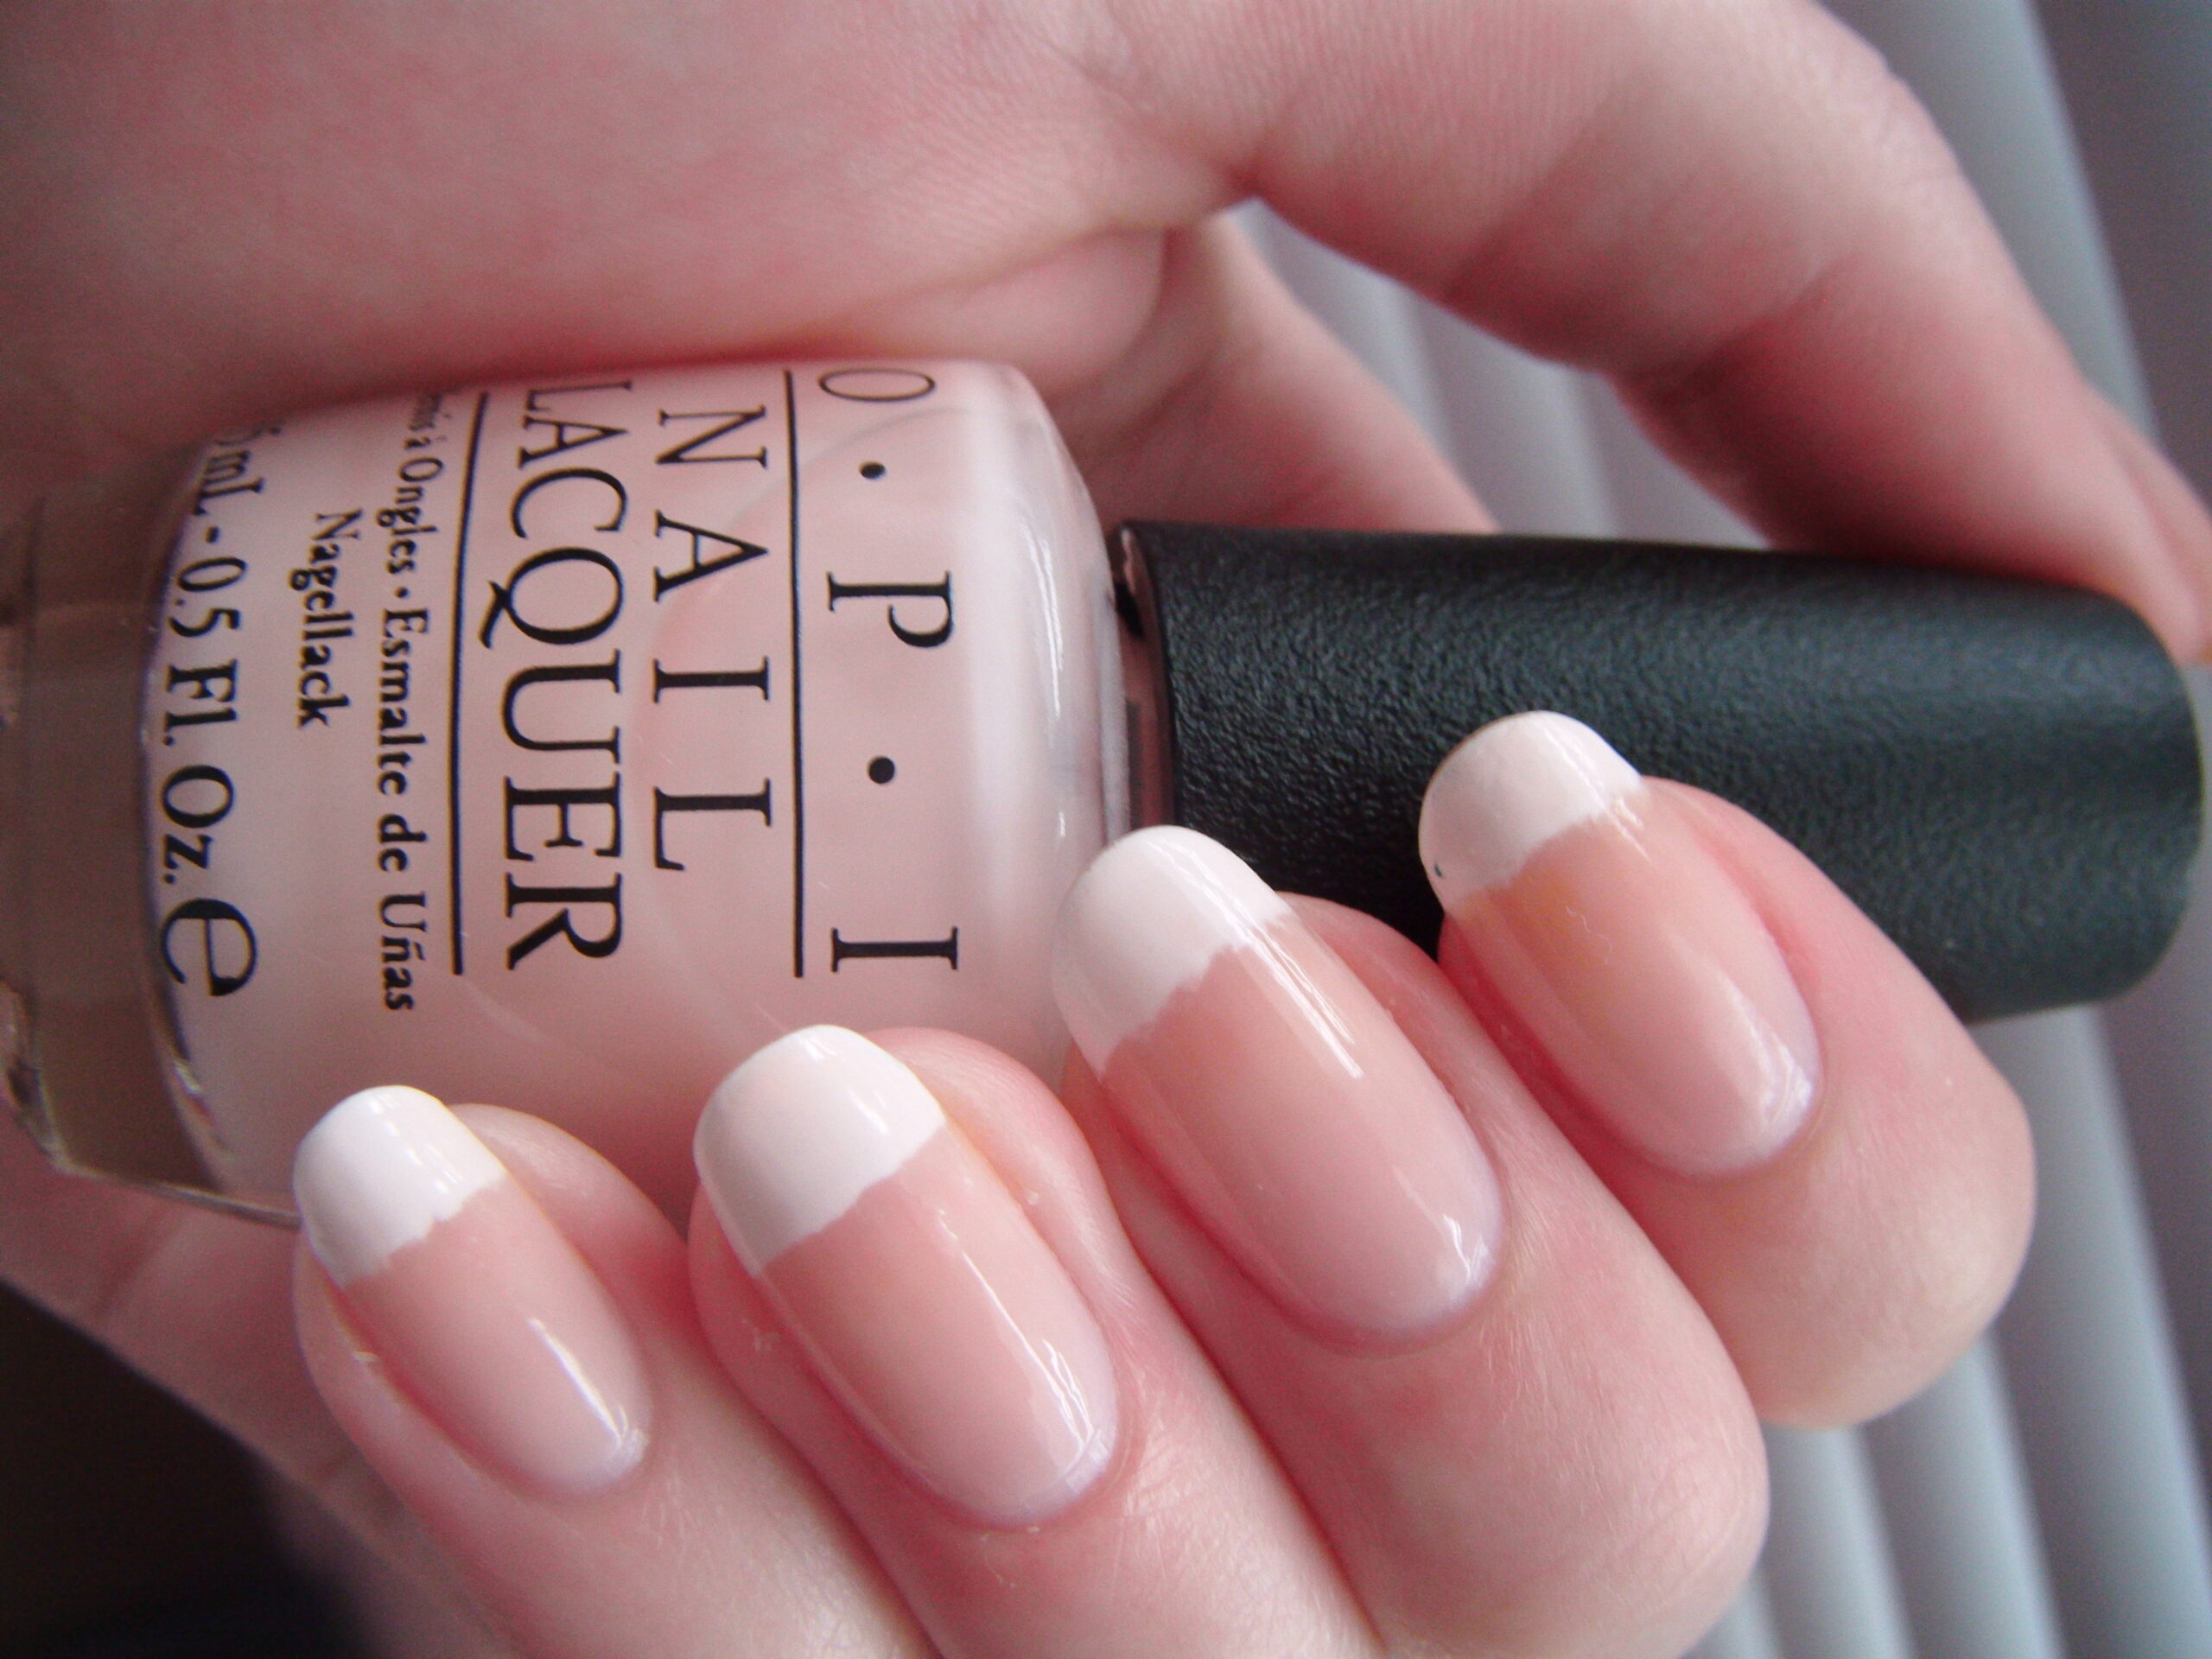 classic French Manicure